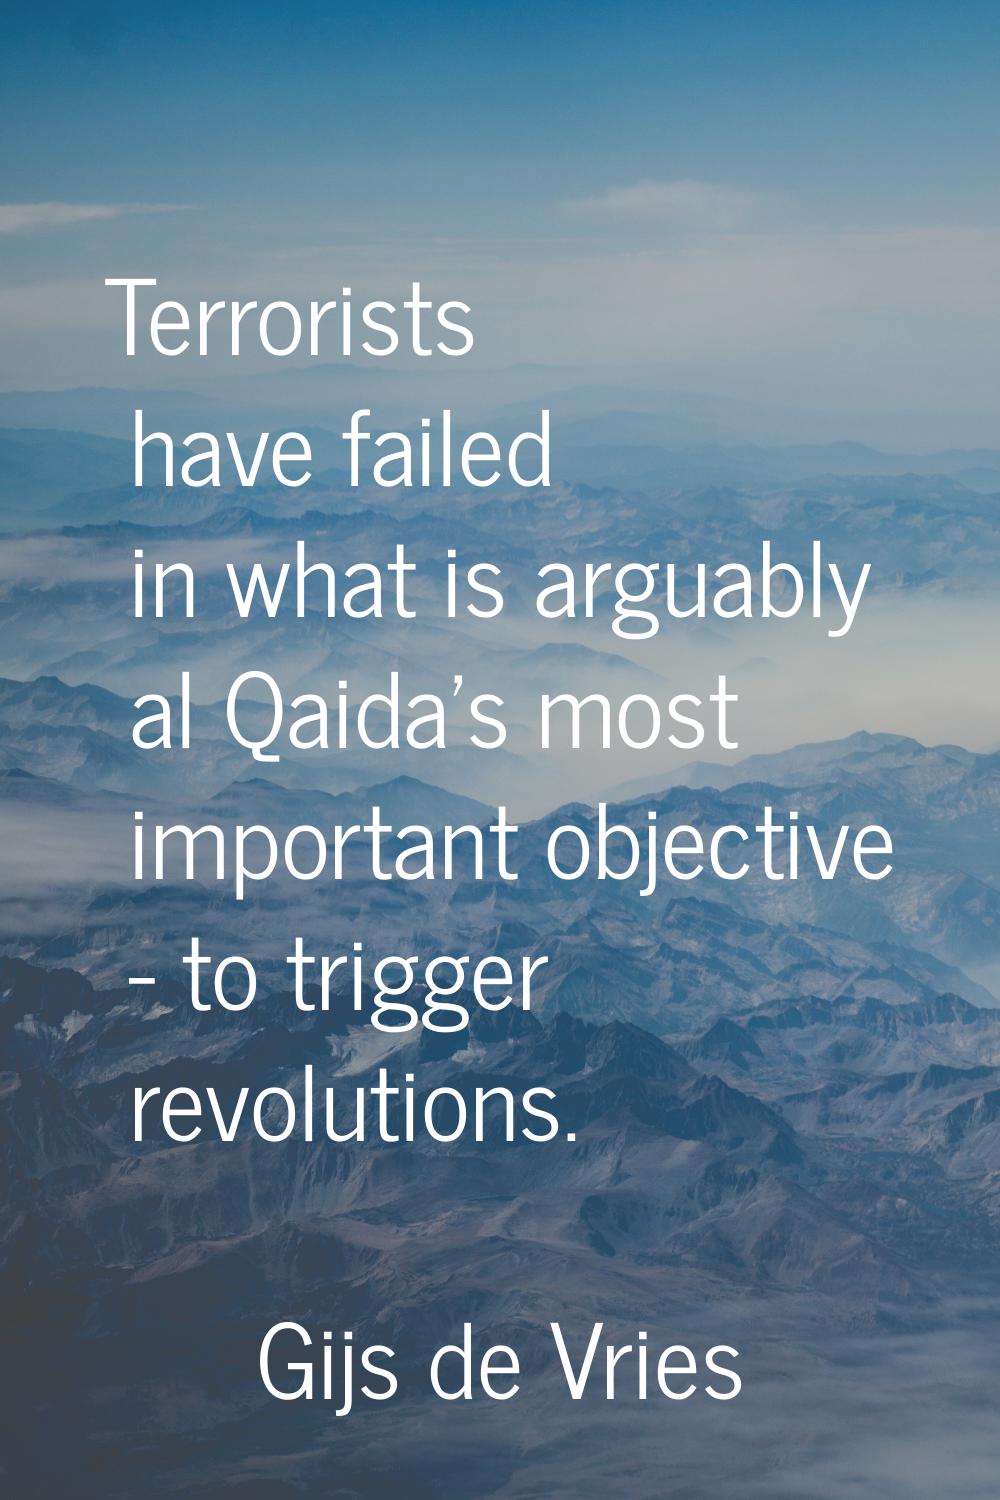 Terrorists have failed in what is arguably al Qaida's most important objective - to trigger revolut